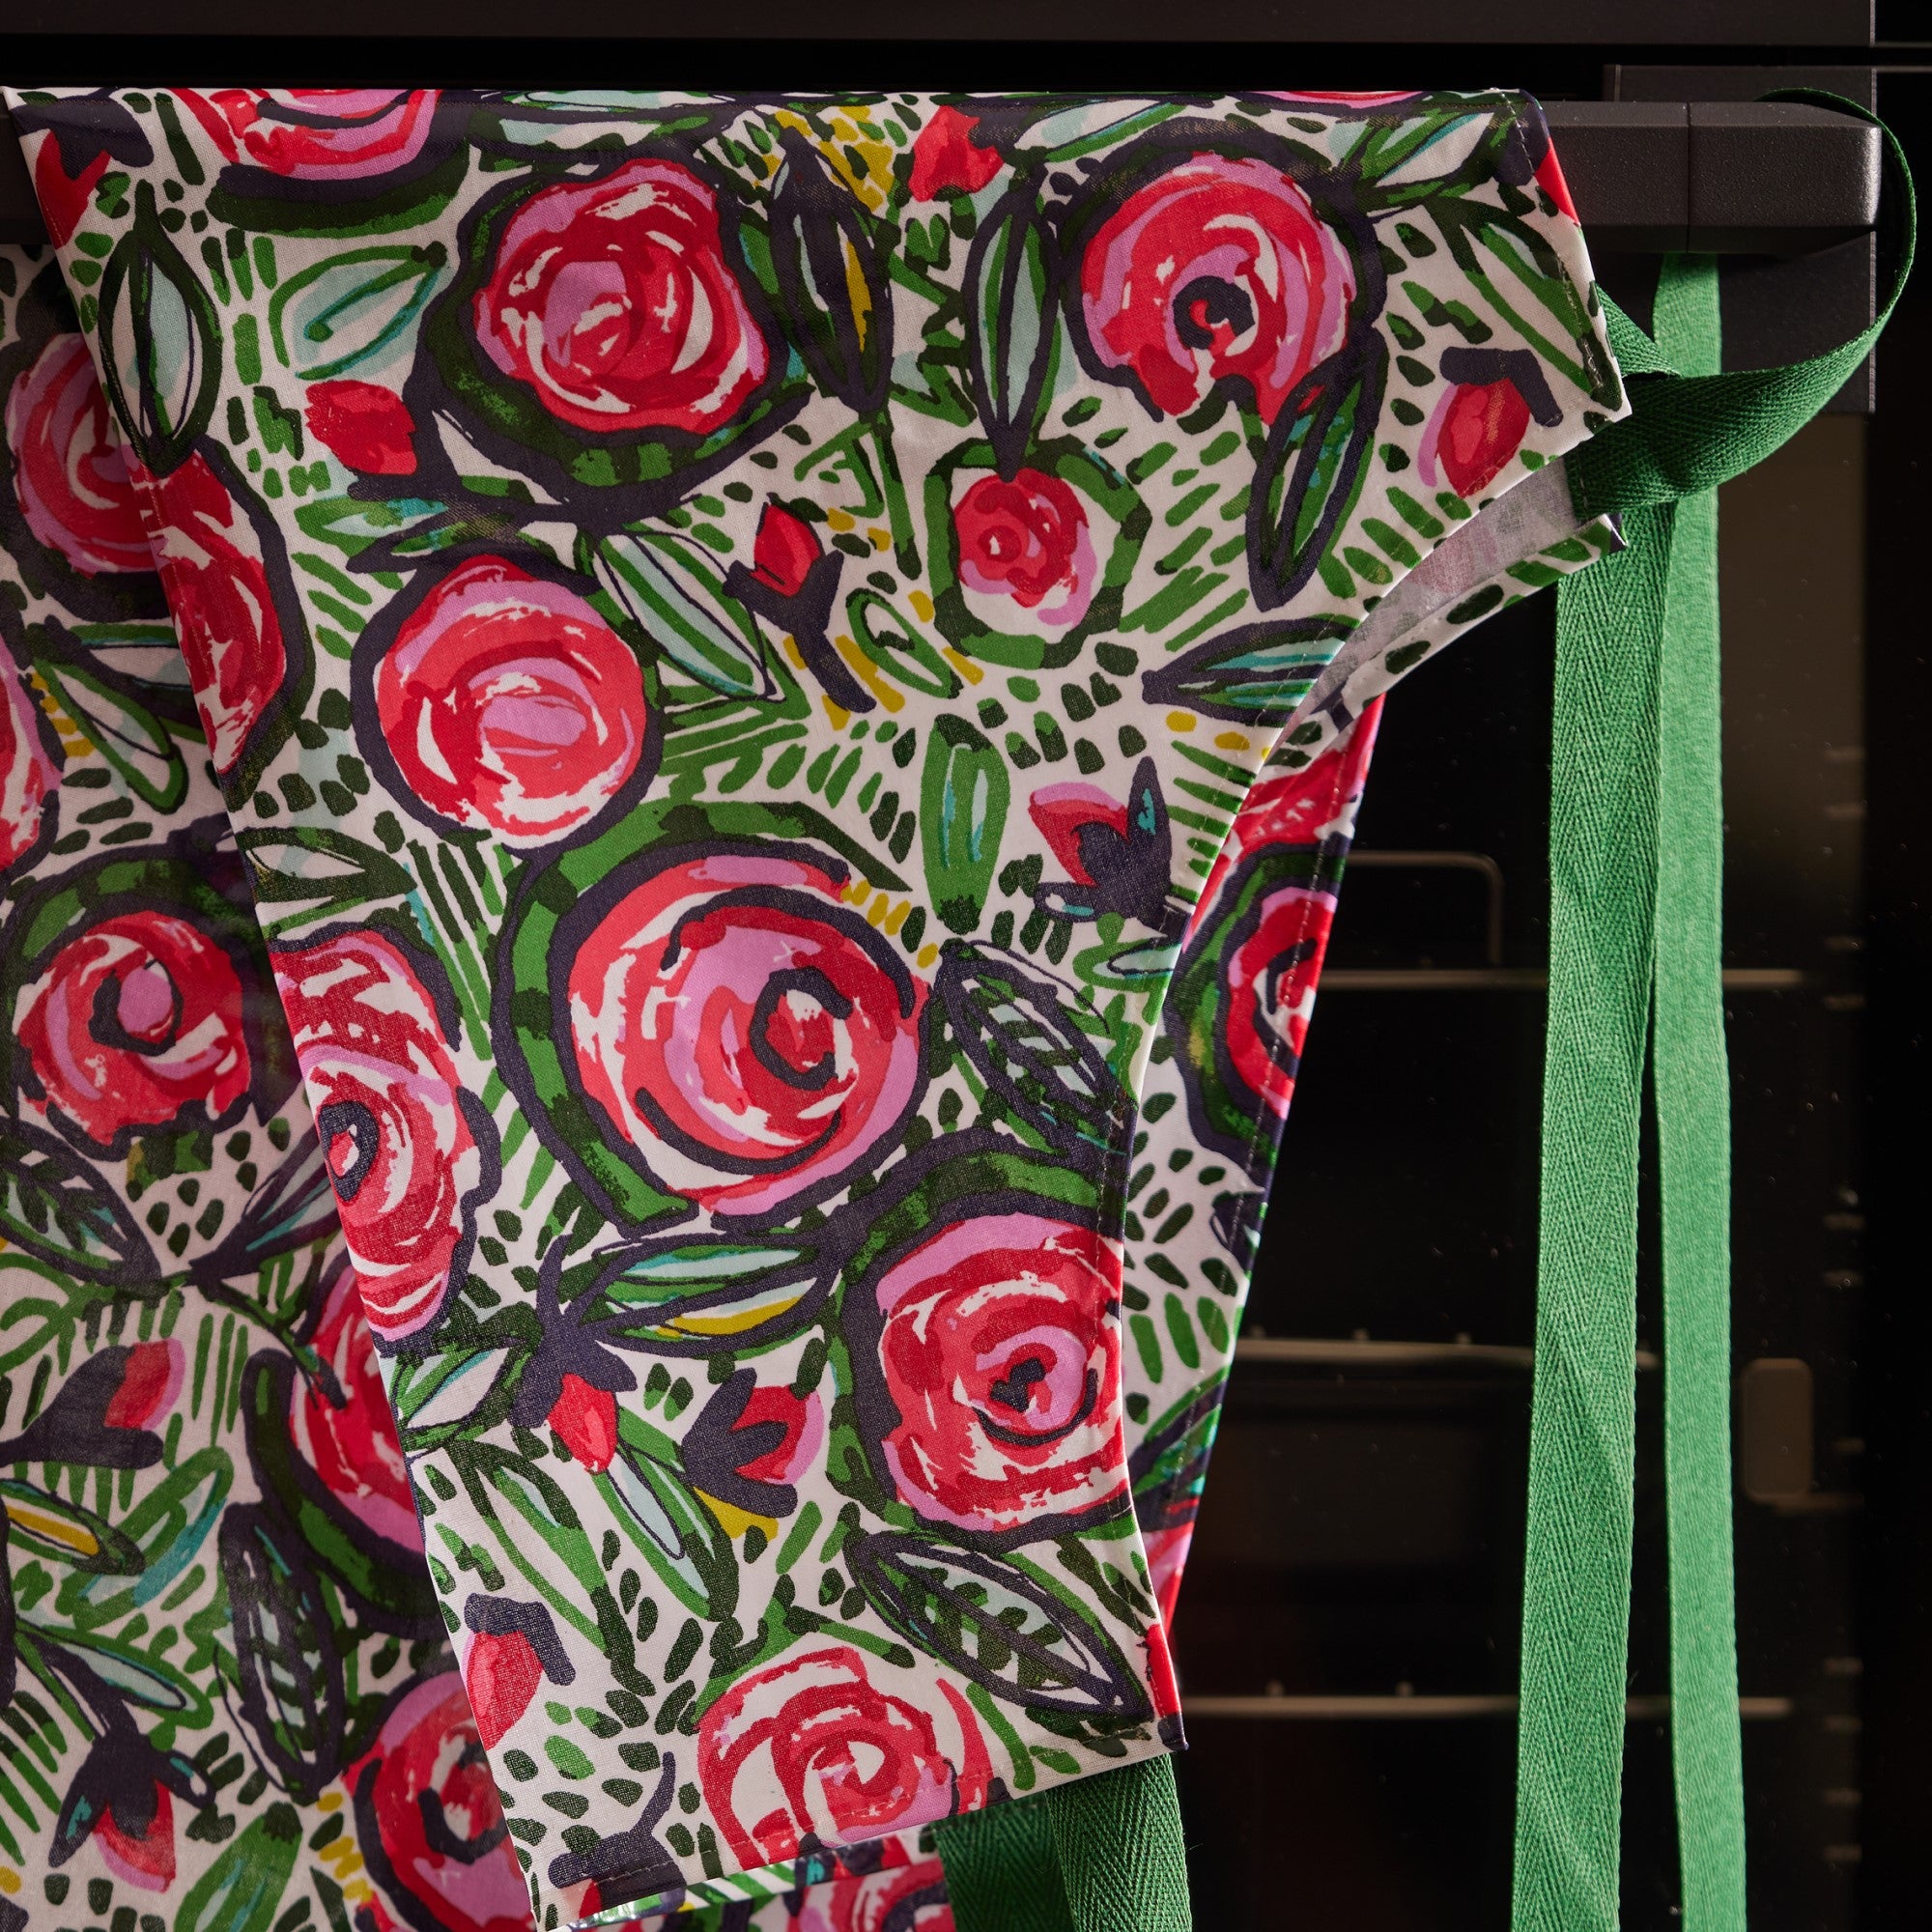 Ulster Weavers Rose Garden Apron - PVC/Oilcloth One Size in Pink - Apron - Ulster Weavers